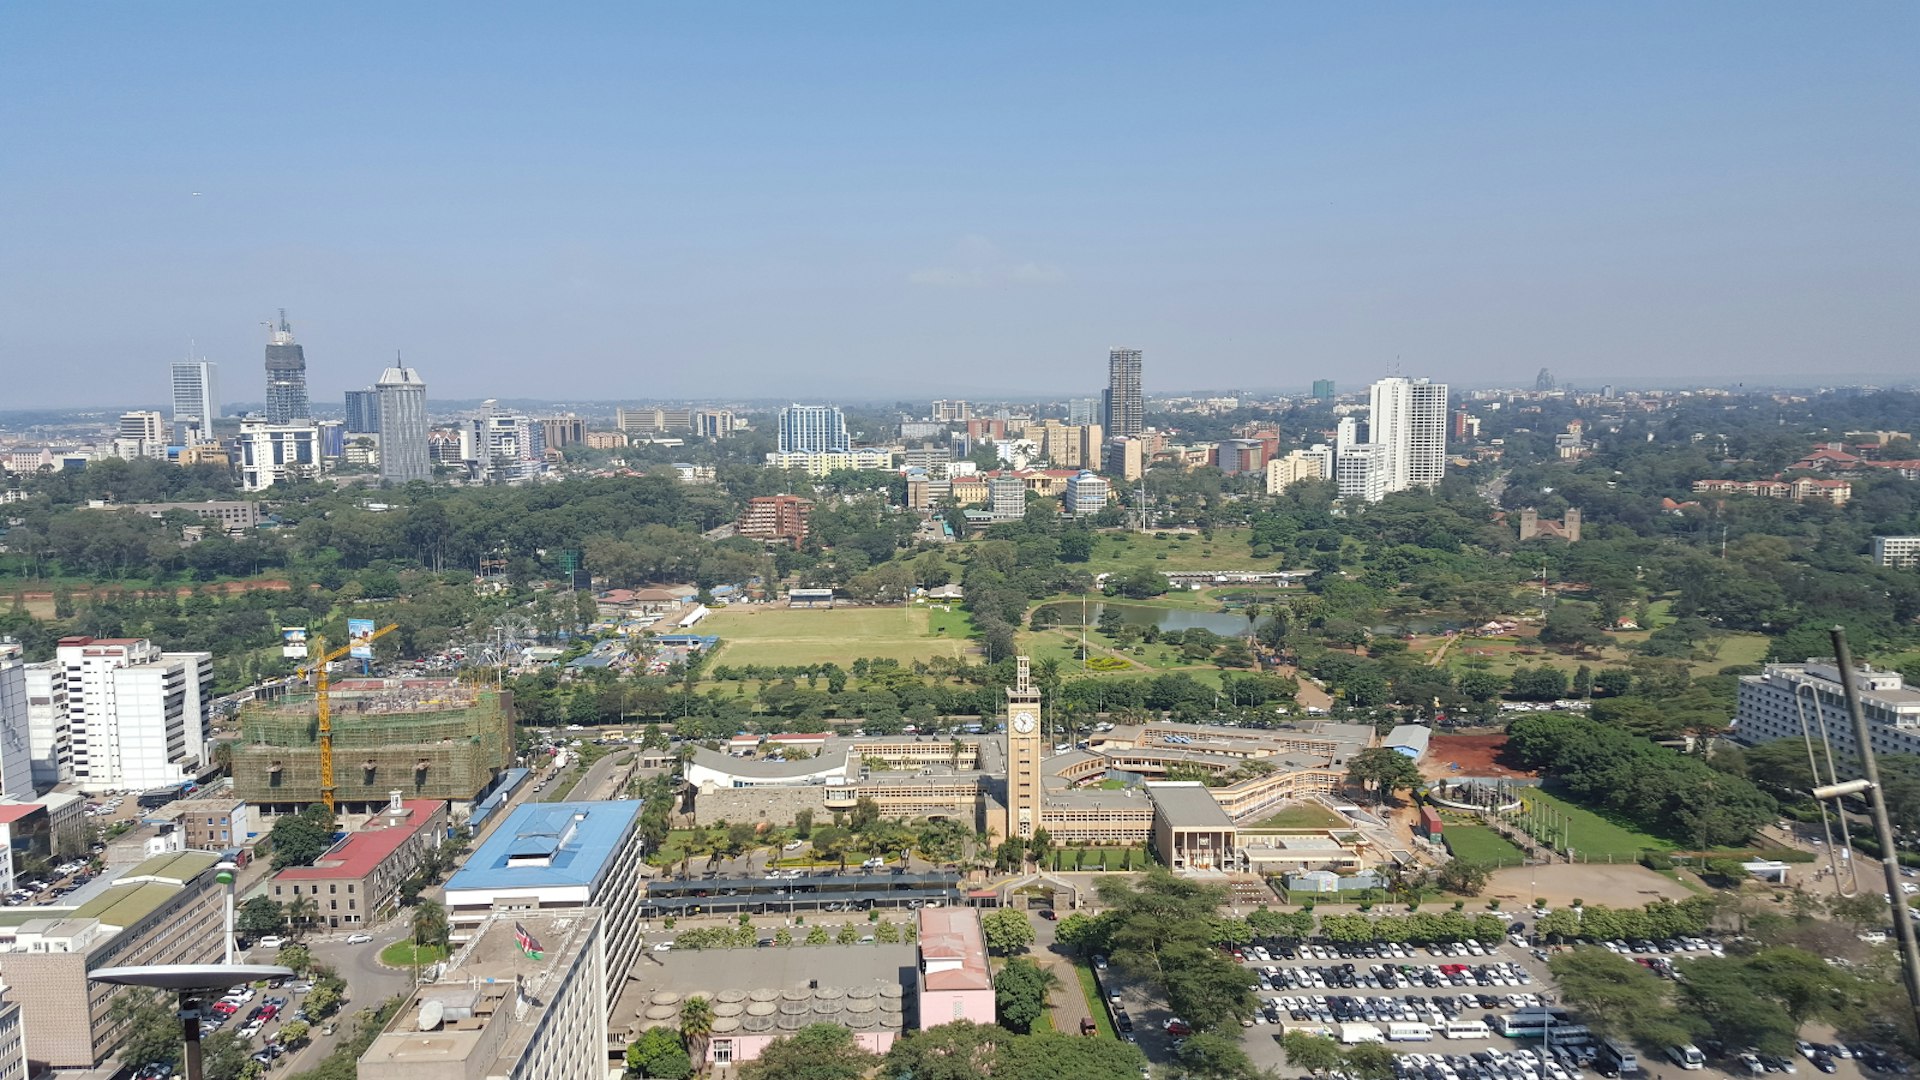 Looking down over green parks and low-rise buildings in central Nairobi from the Kenyatta International Conference Centre© Clementine Logan / Lonely Planet